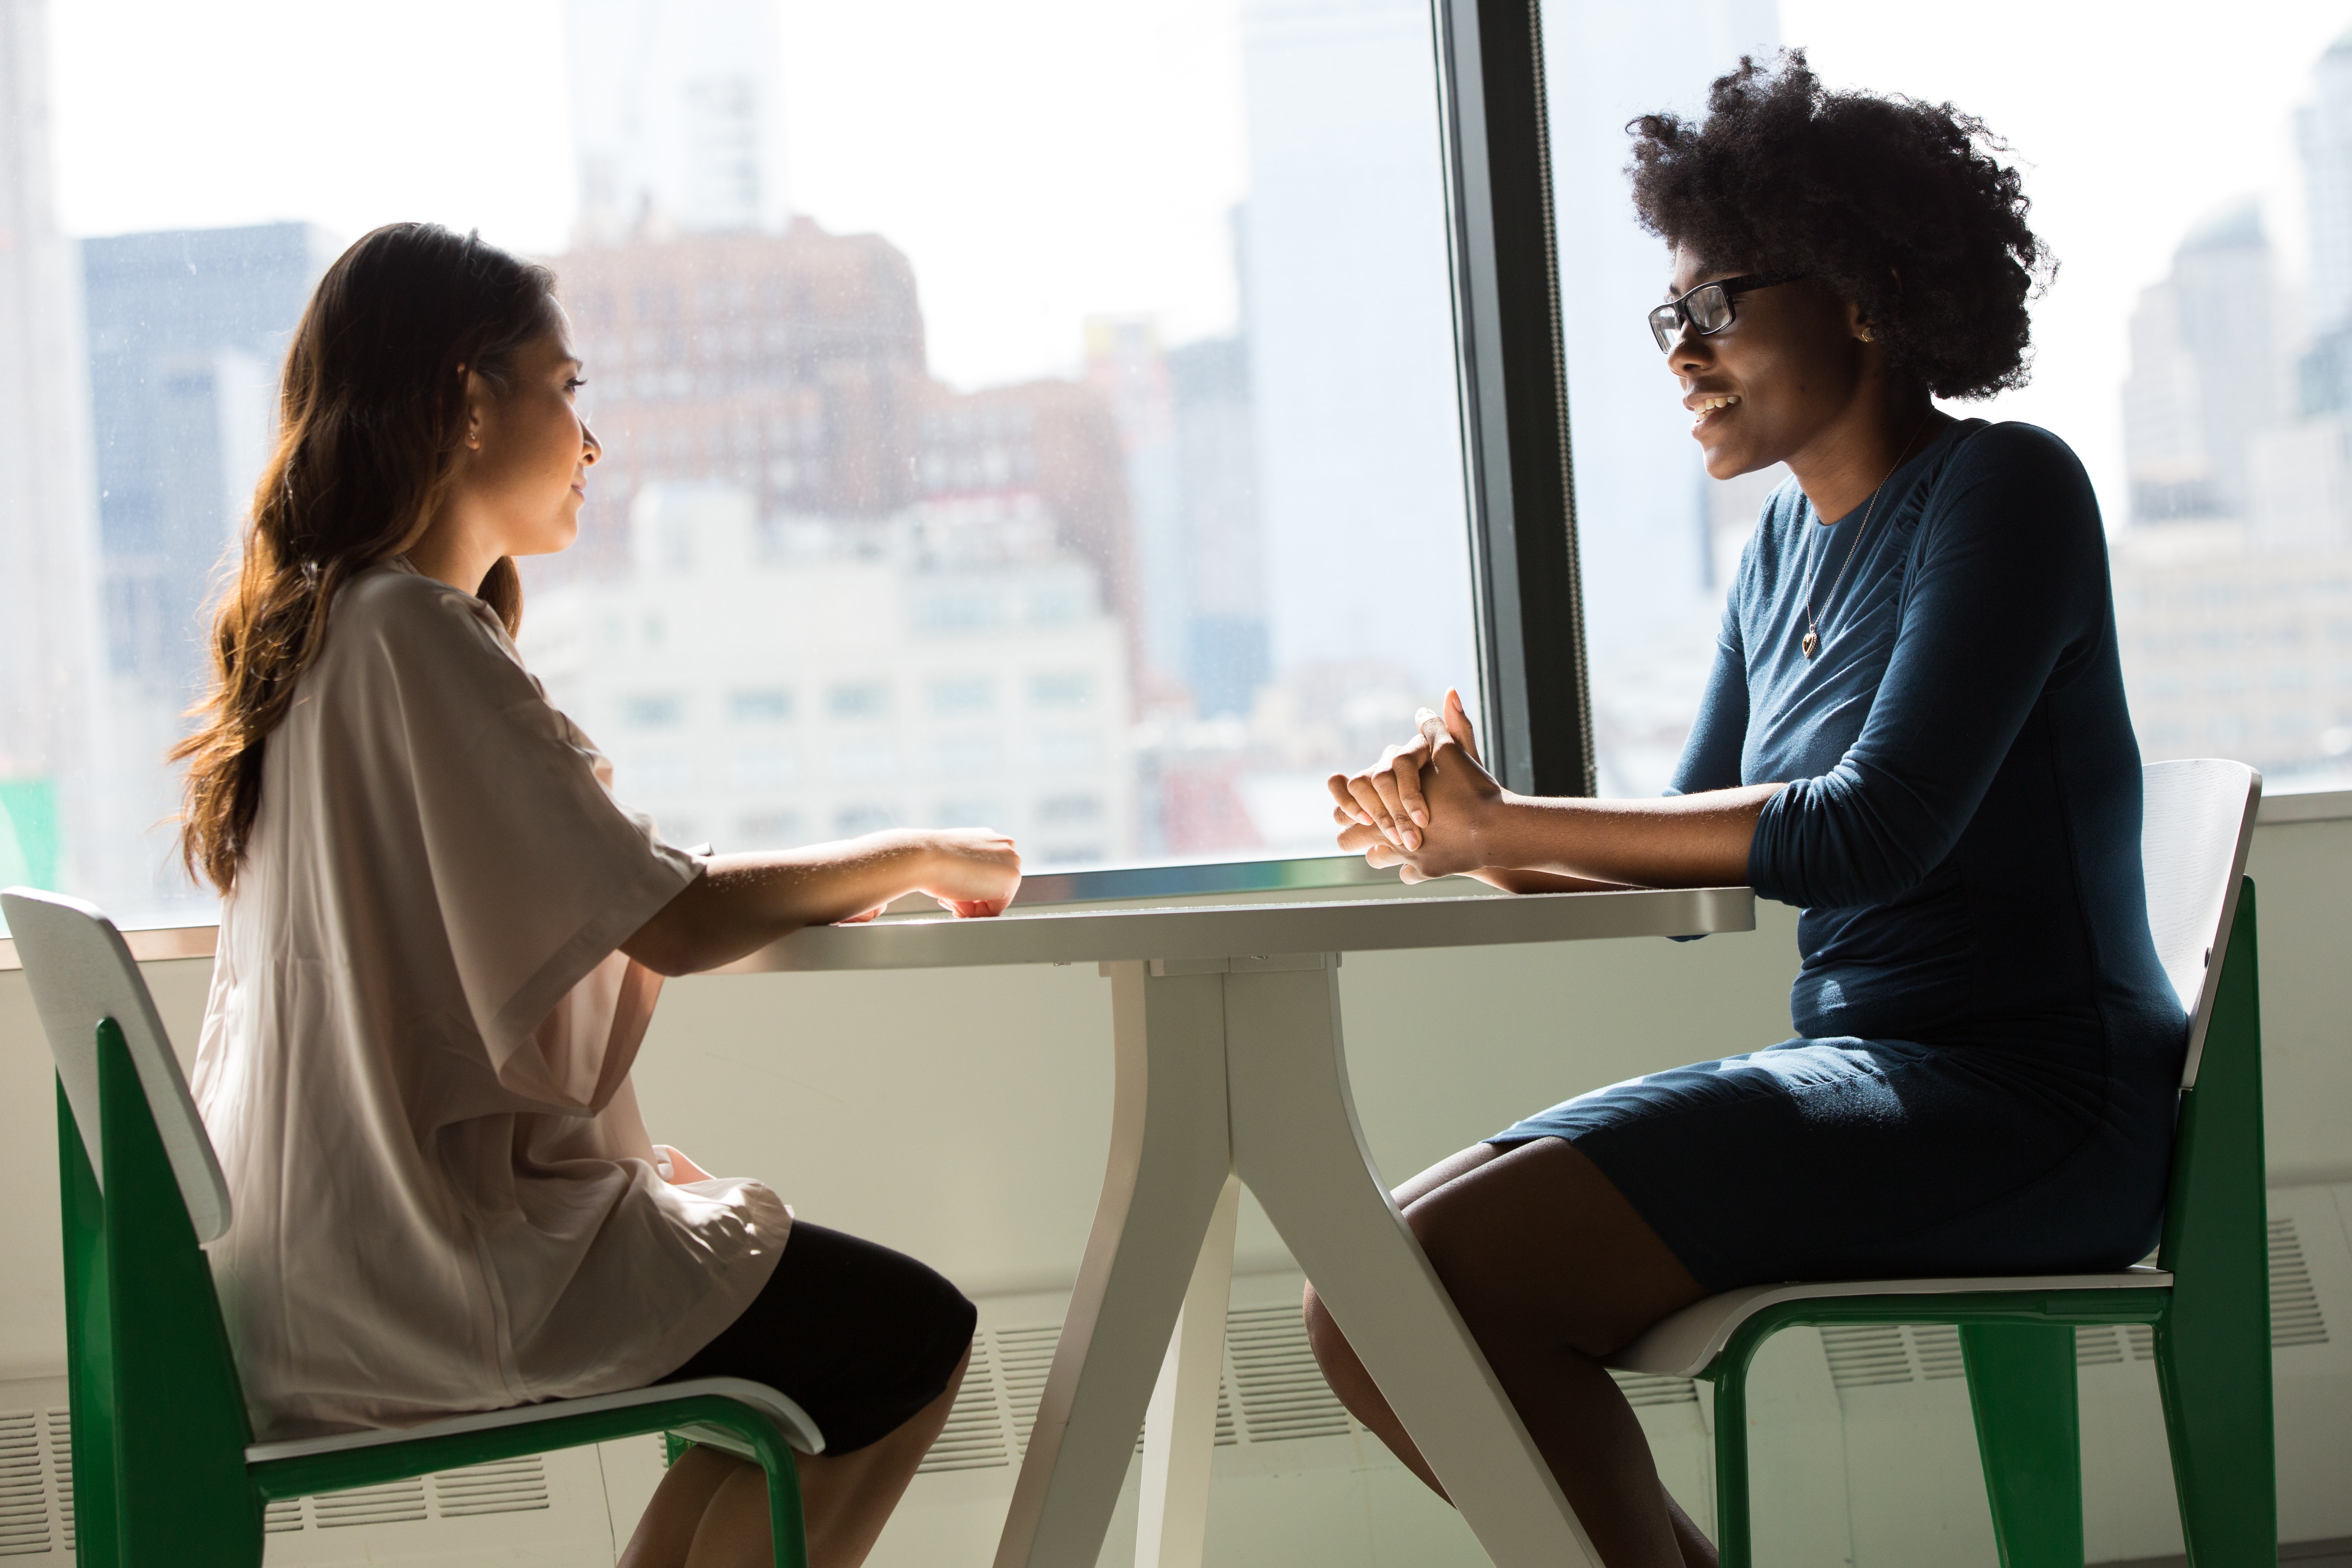 Great Interviews: What Should You Be Asking to Get the Most Out of the Hiring Process?